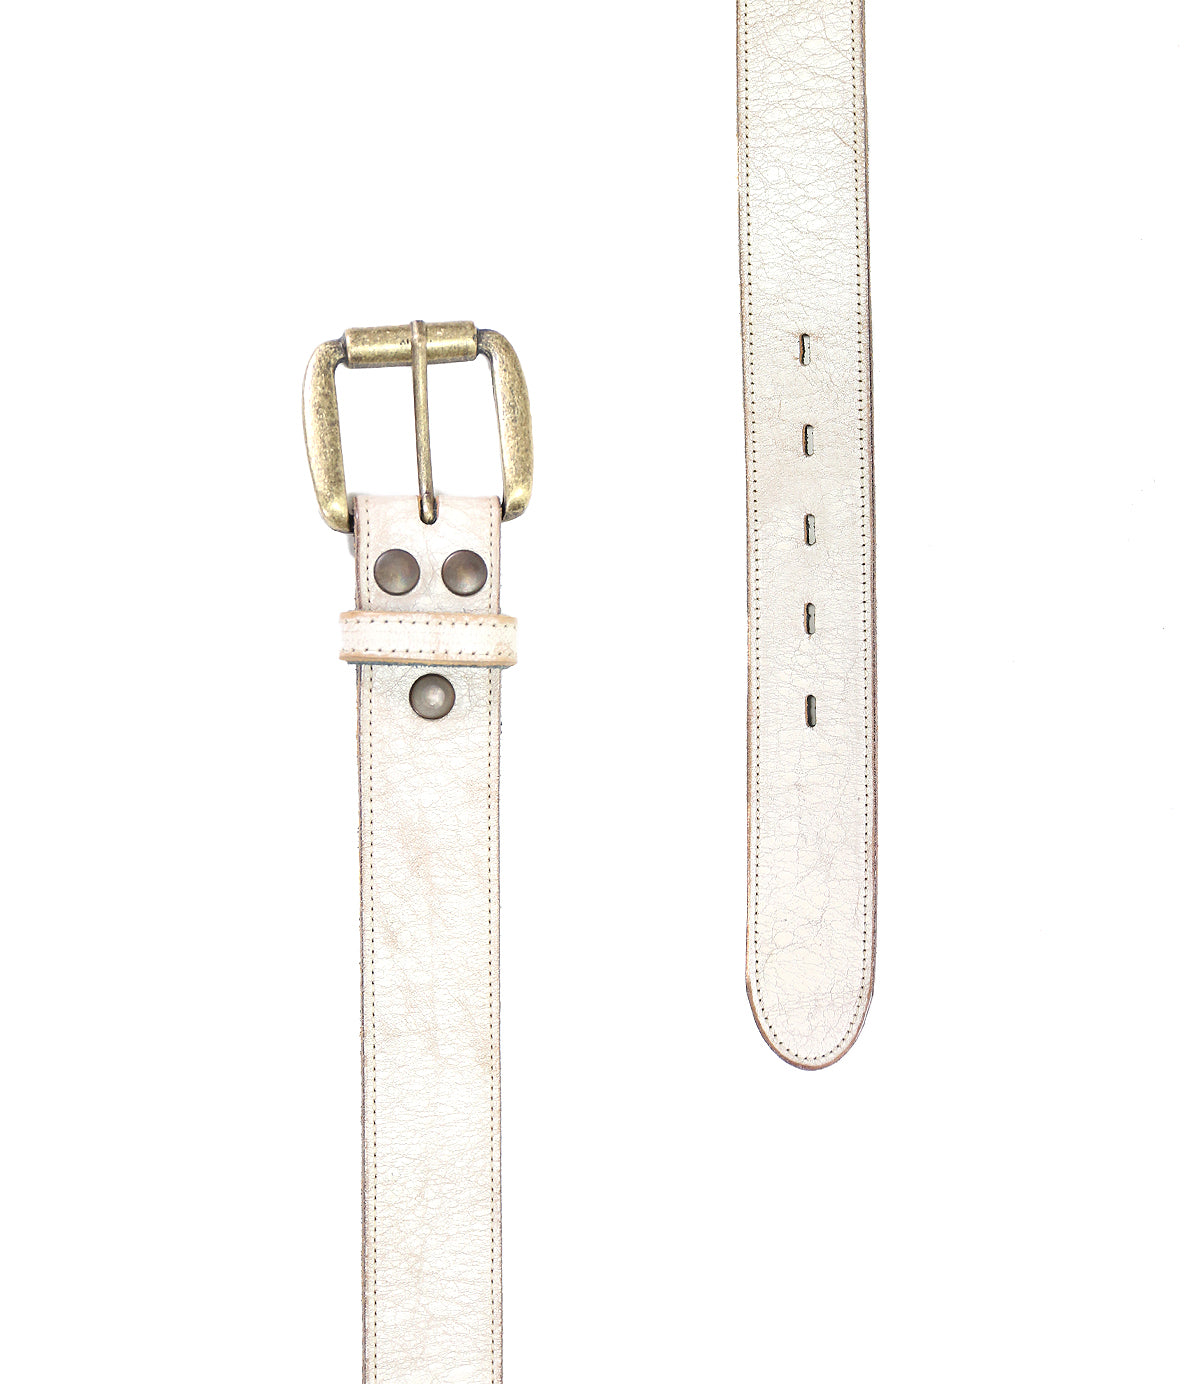 Two separate parts of a Meander distressed white leather belt by Bed Stu displayed against a white background, one with a removable buckle and the other with holes.